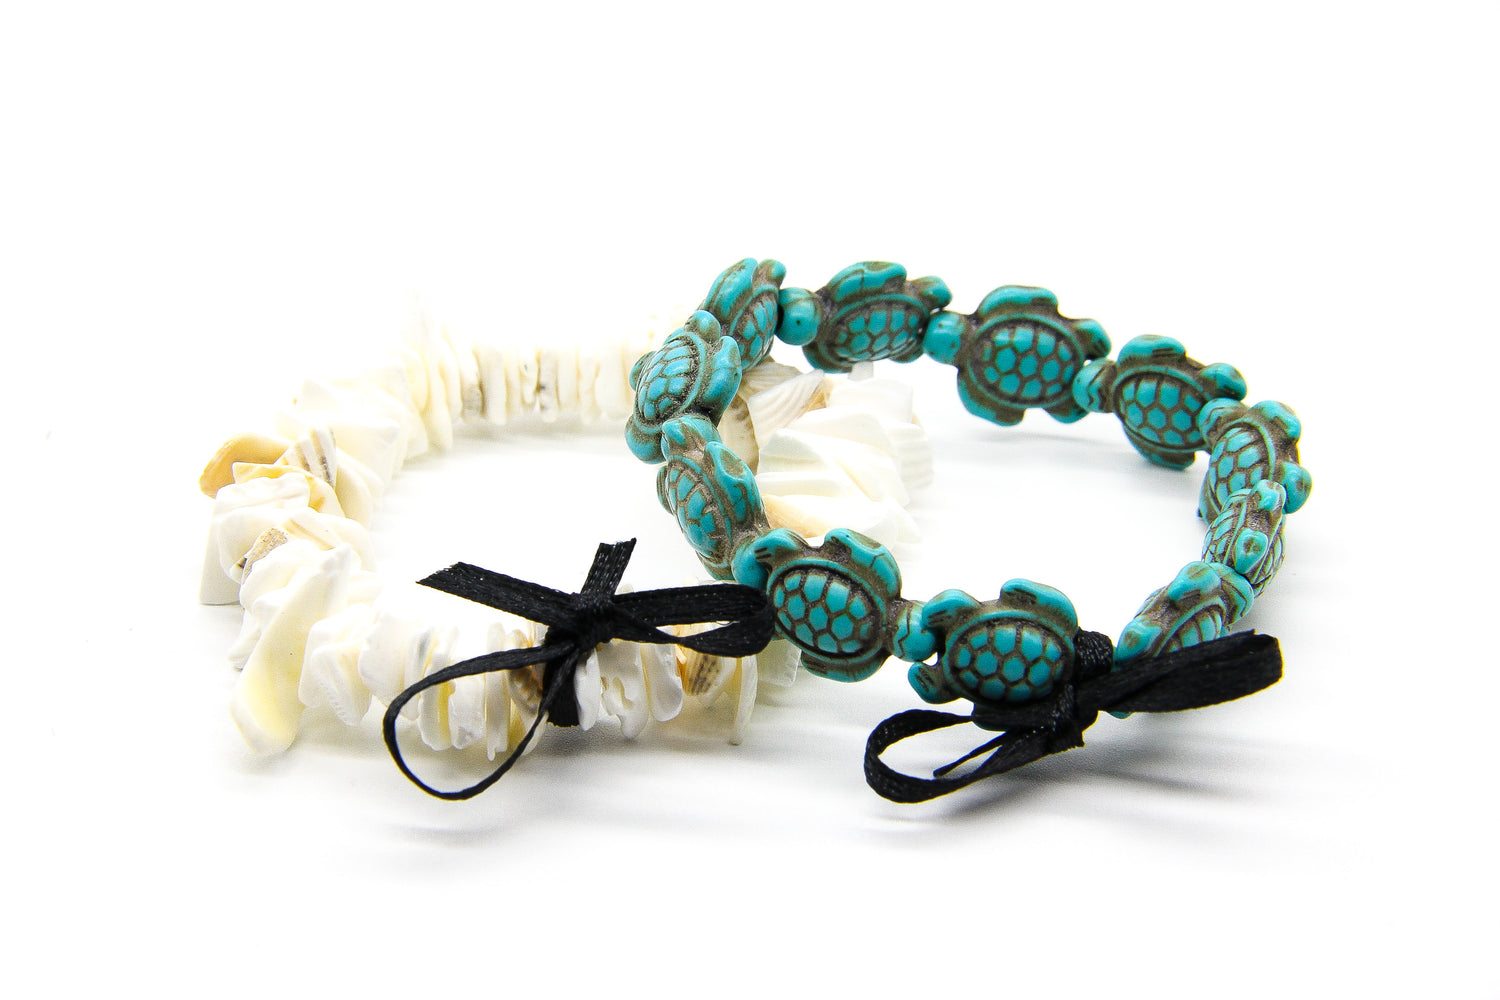 Pair of beach-style bracelets 1 made from seashell chips, the other made from turquoise sea turtles 